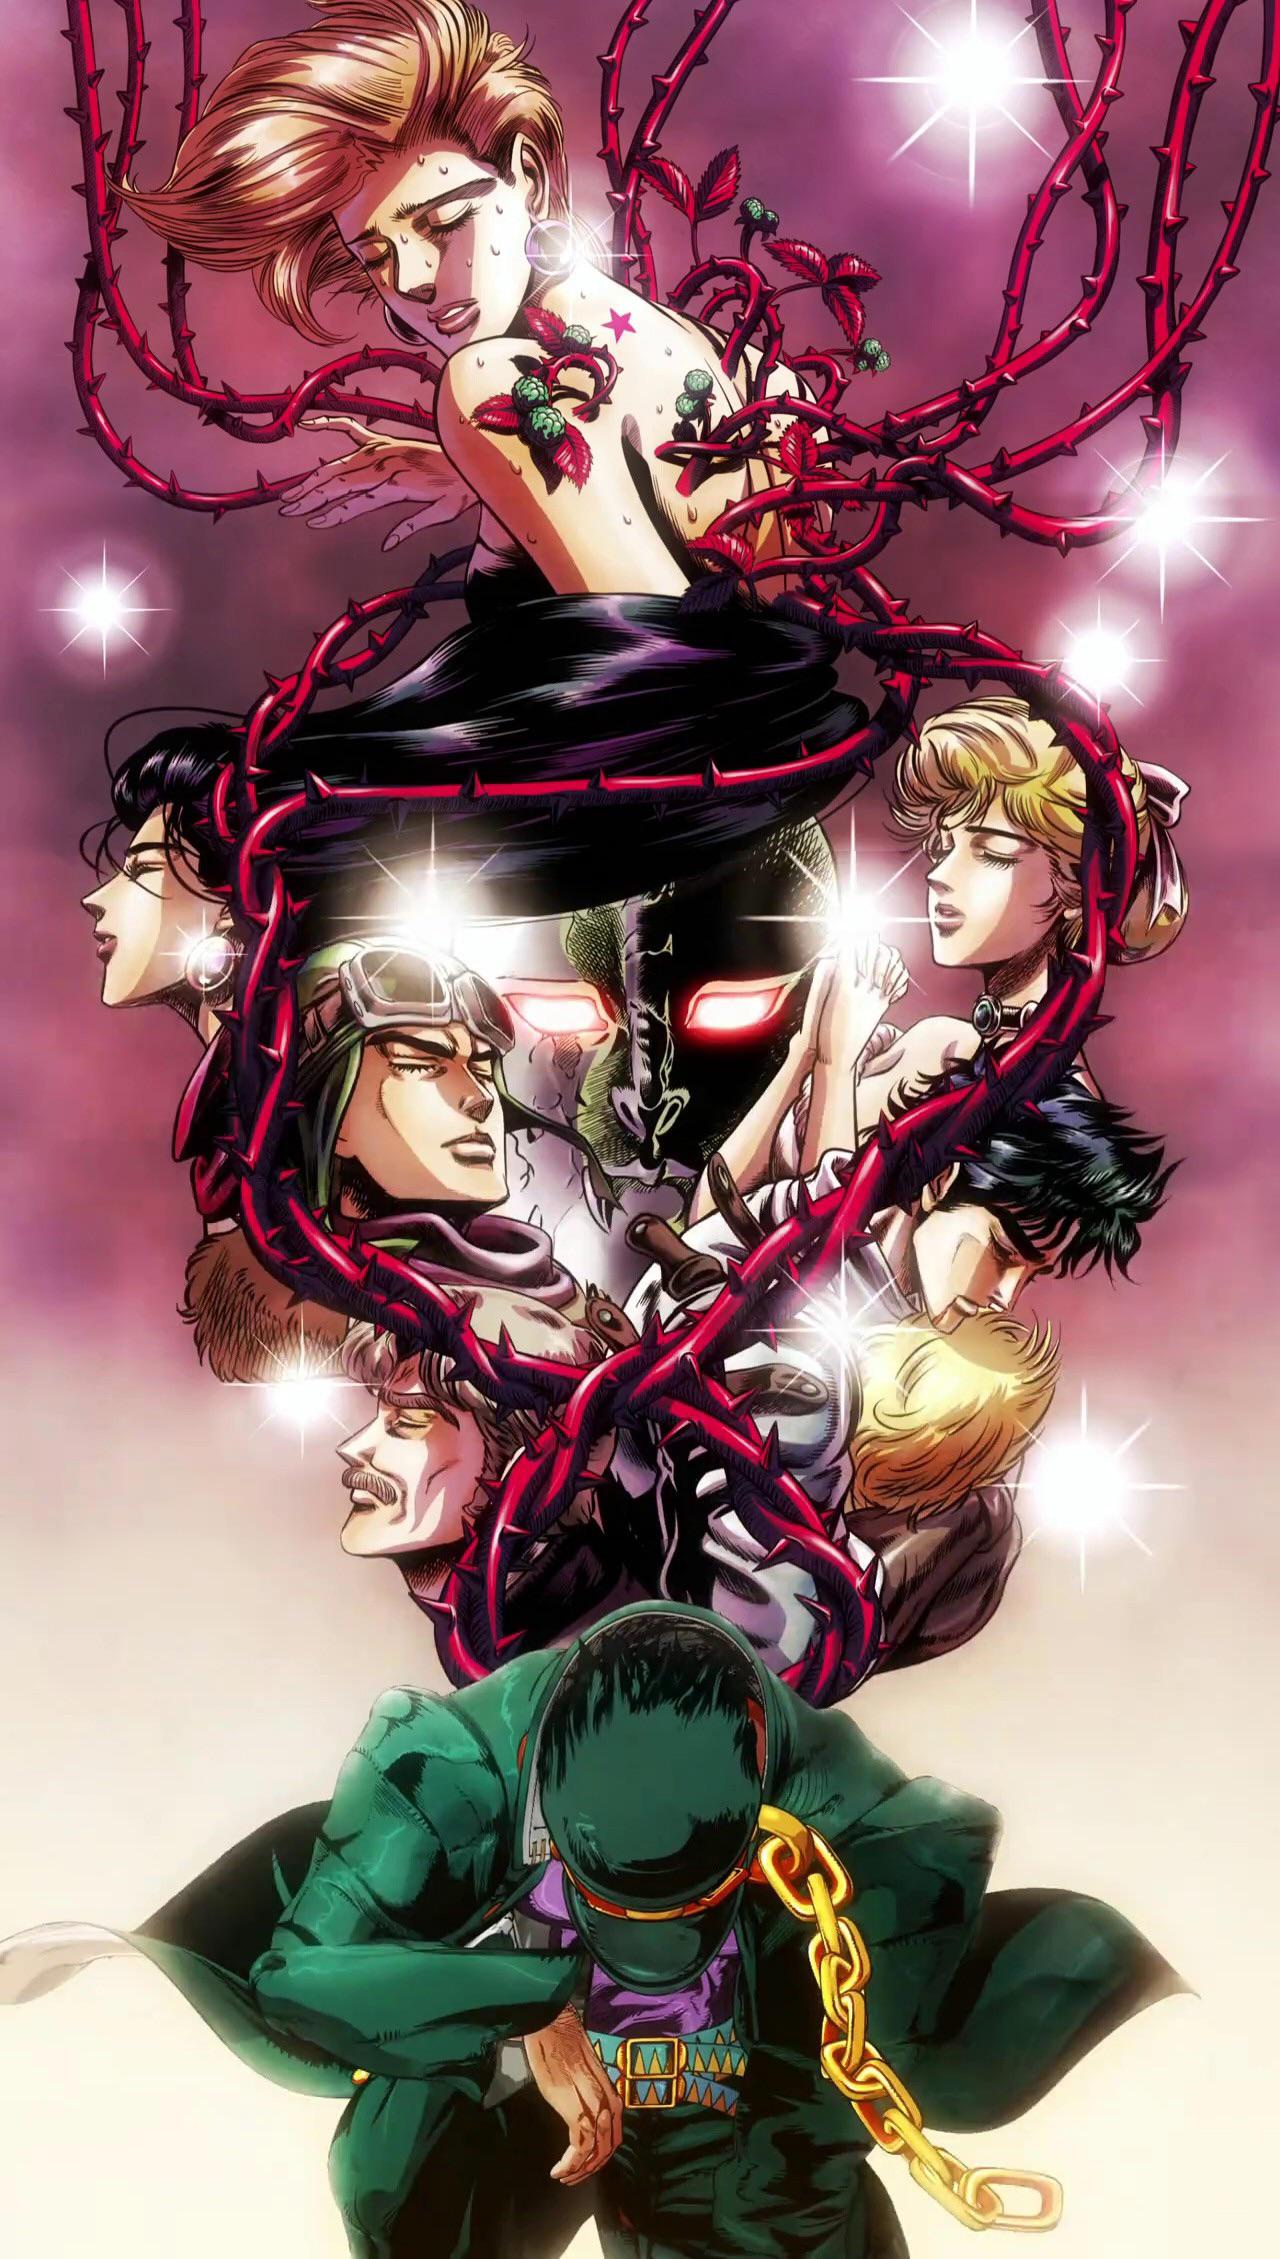 I finally found i full high quality version of this scene from stand proud best wallpaper i ever had rstardustcrusaders